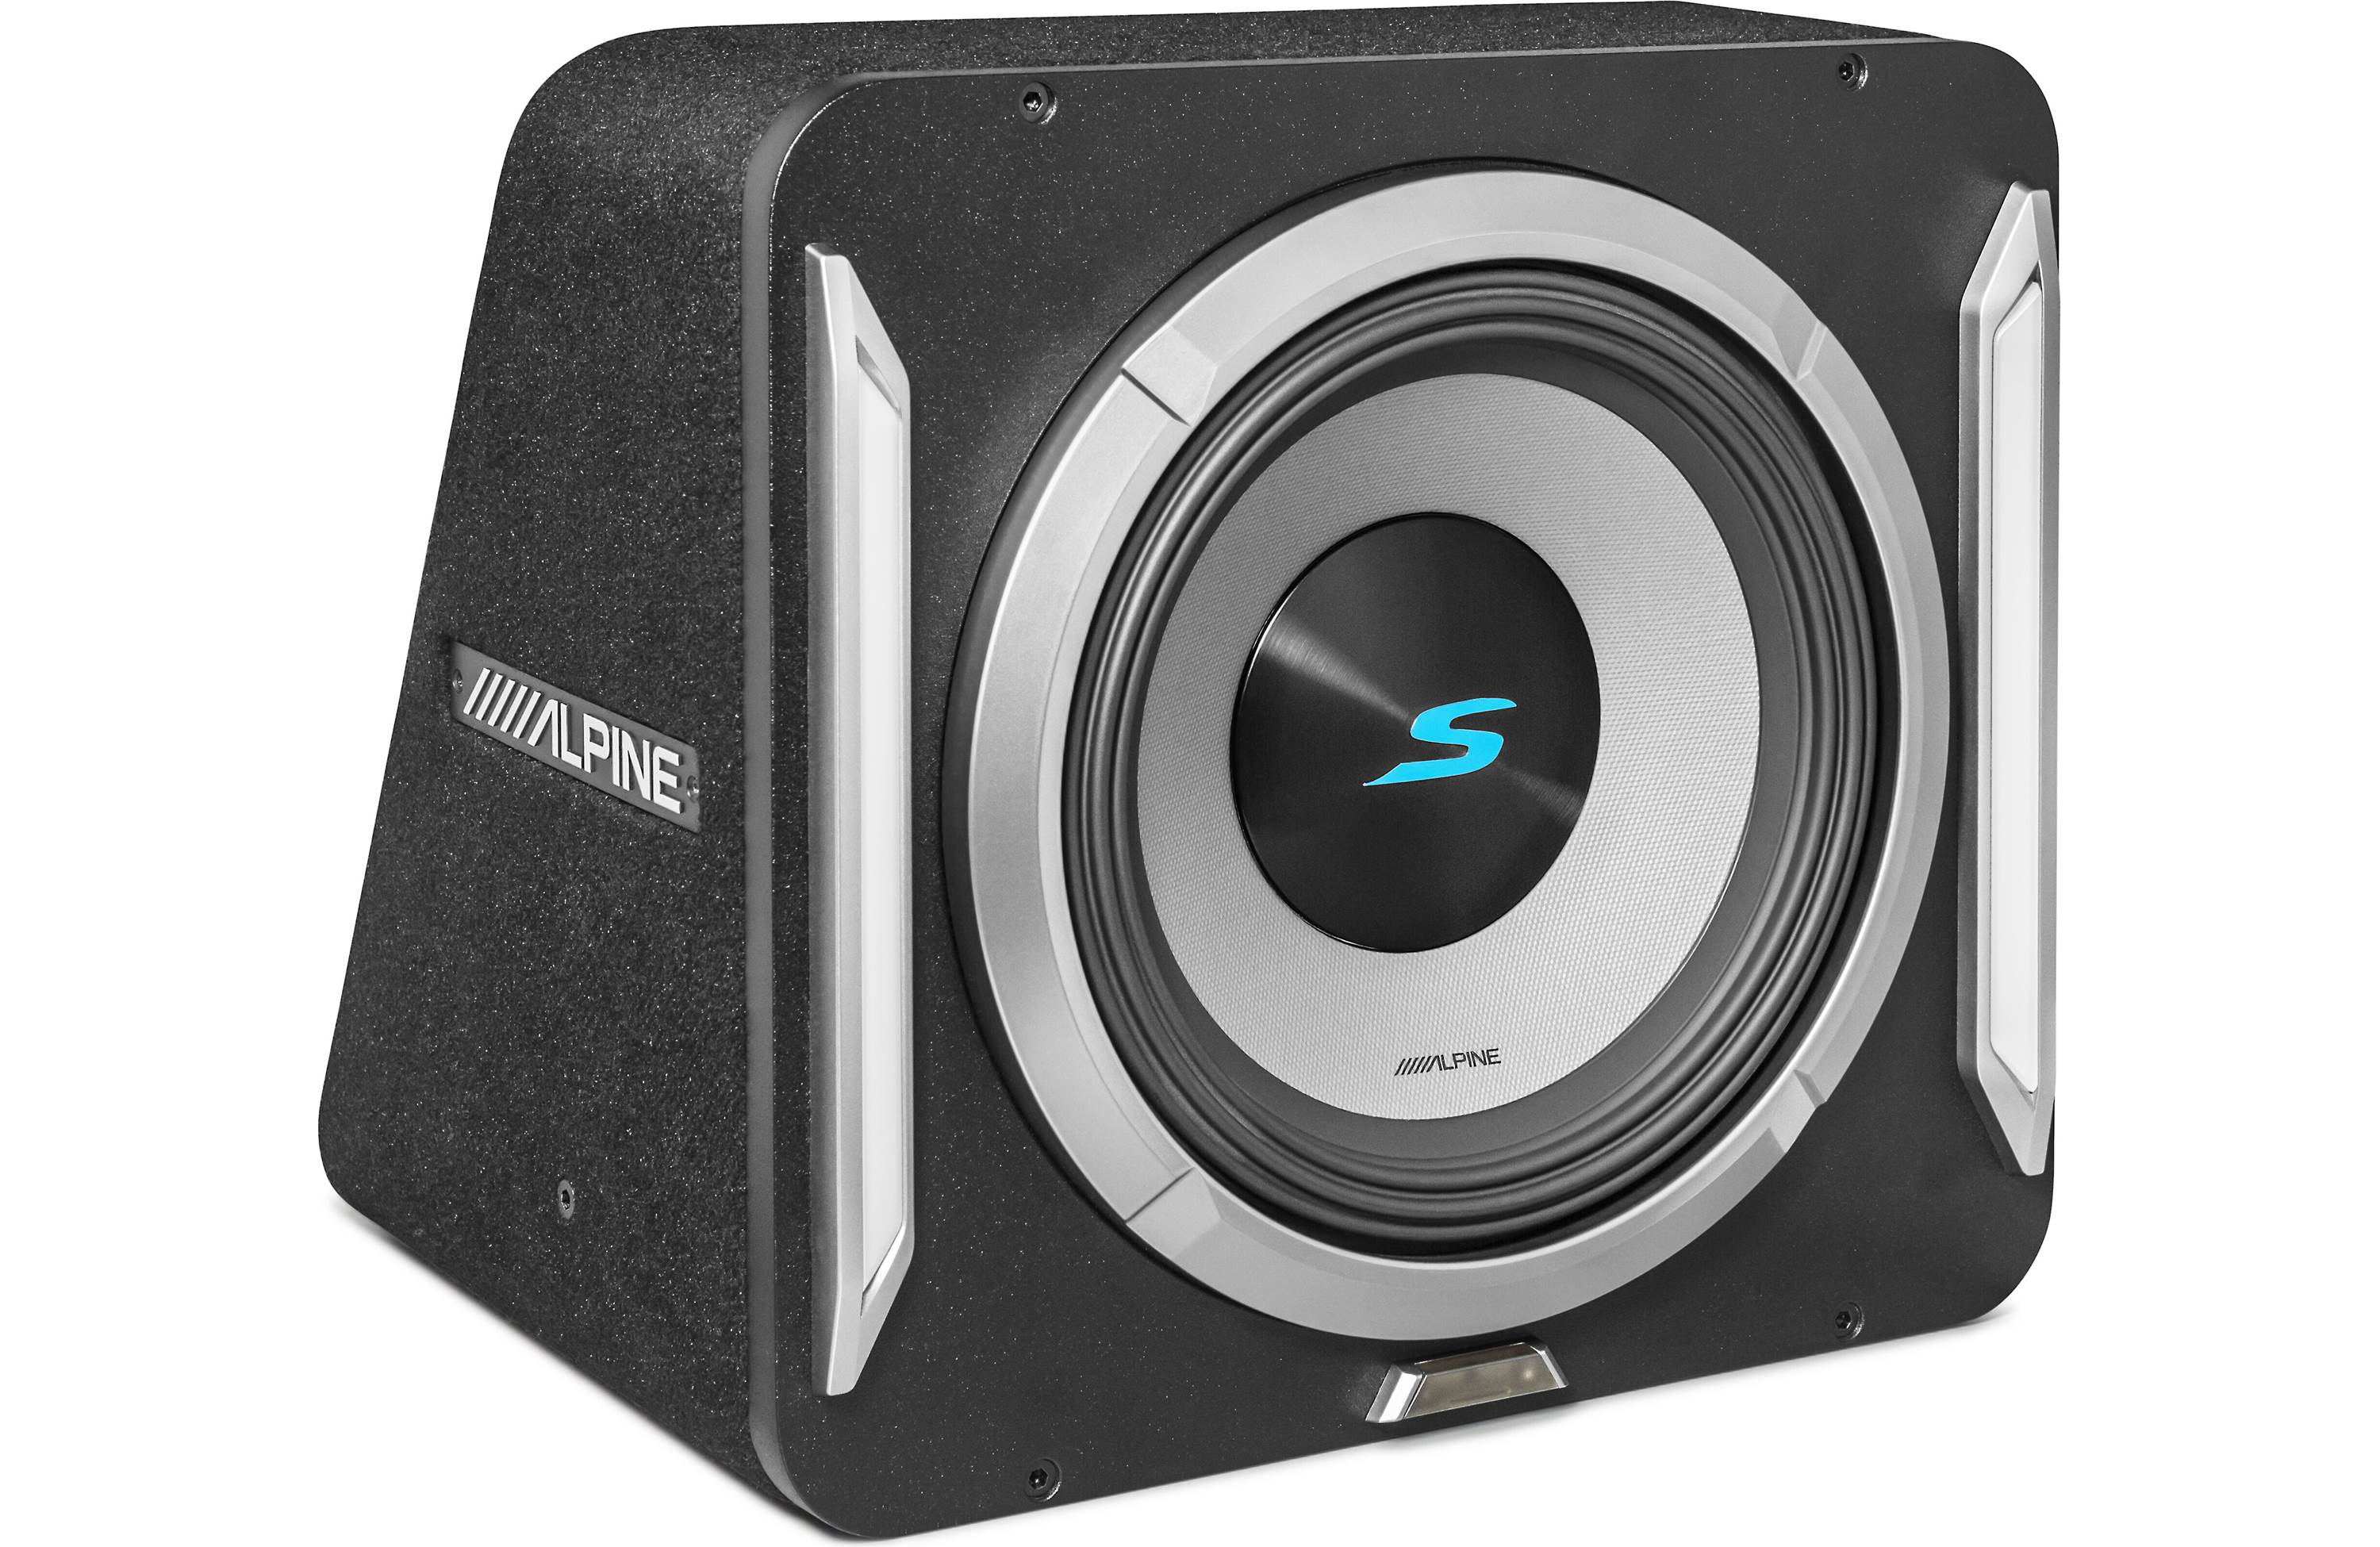 Alpine S2-SB12 PrismaLink™ S2-Series sealed subwoofer enclosure with 12" subwoofer and RGB lighting